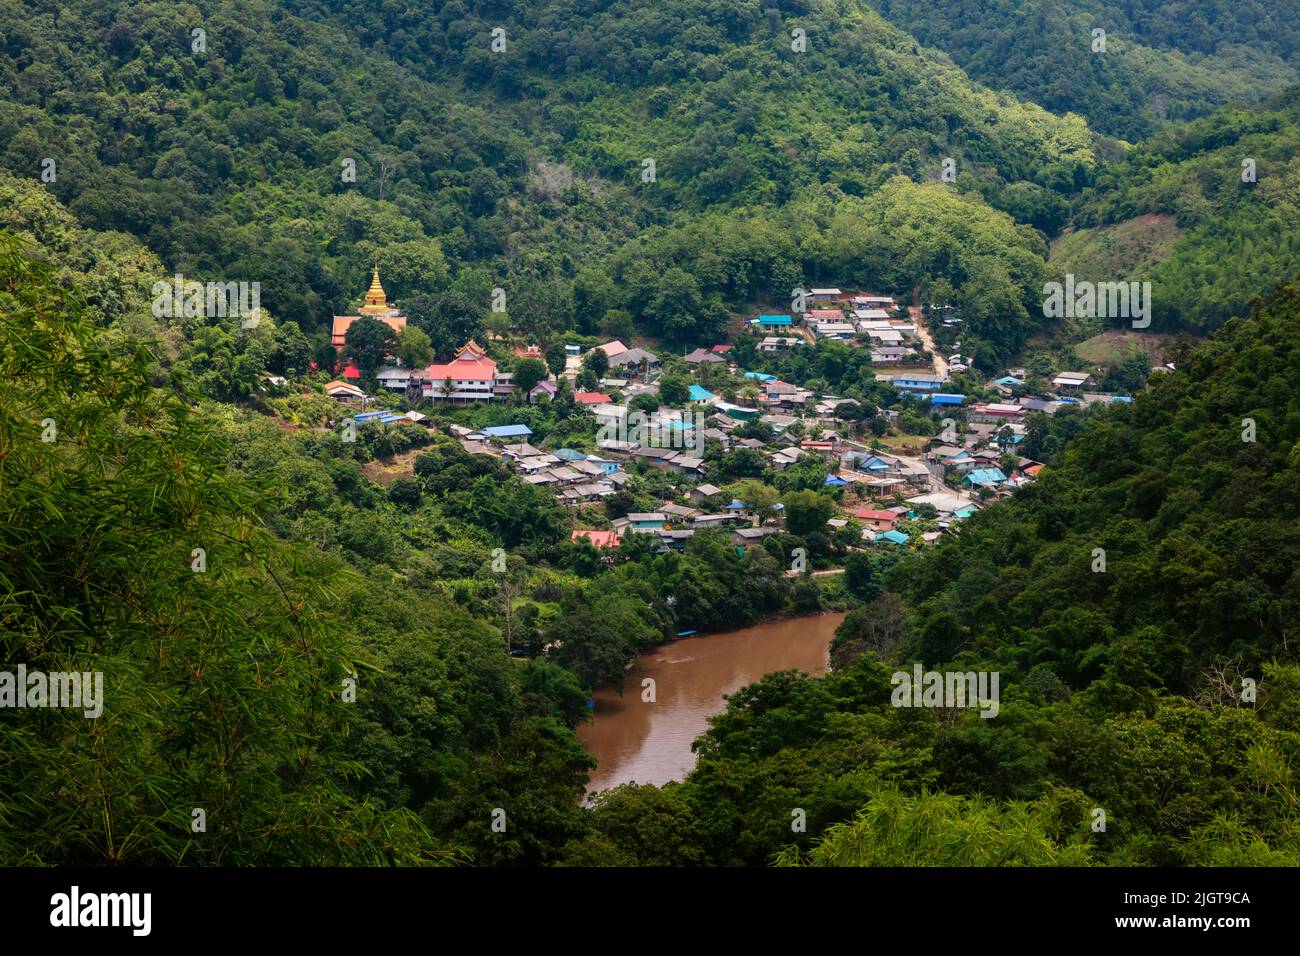 A Burmese village across the Mae Kok River near the town of Tha Thong in Northern Thailand Stock Photo